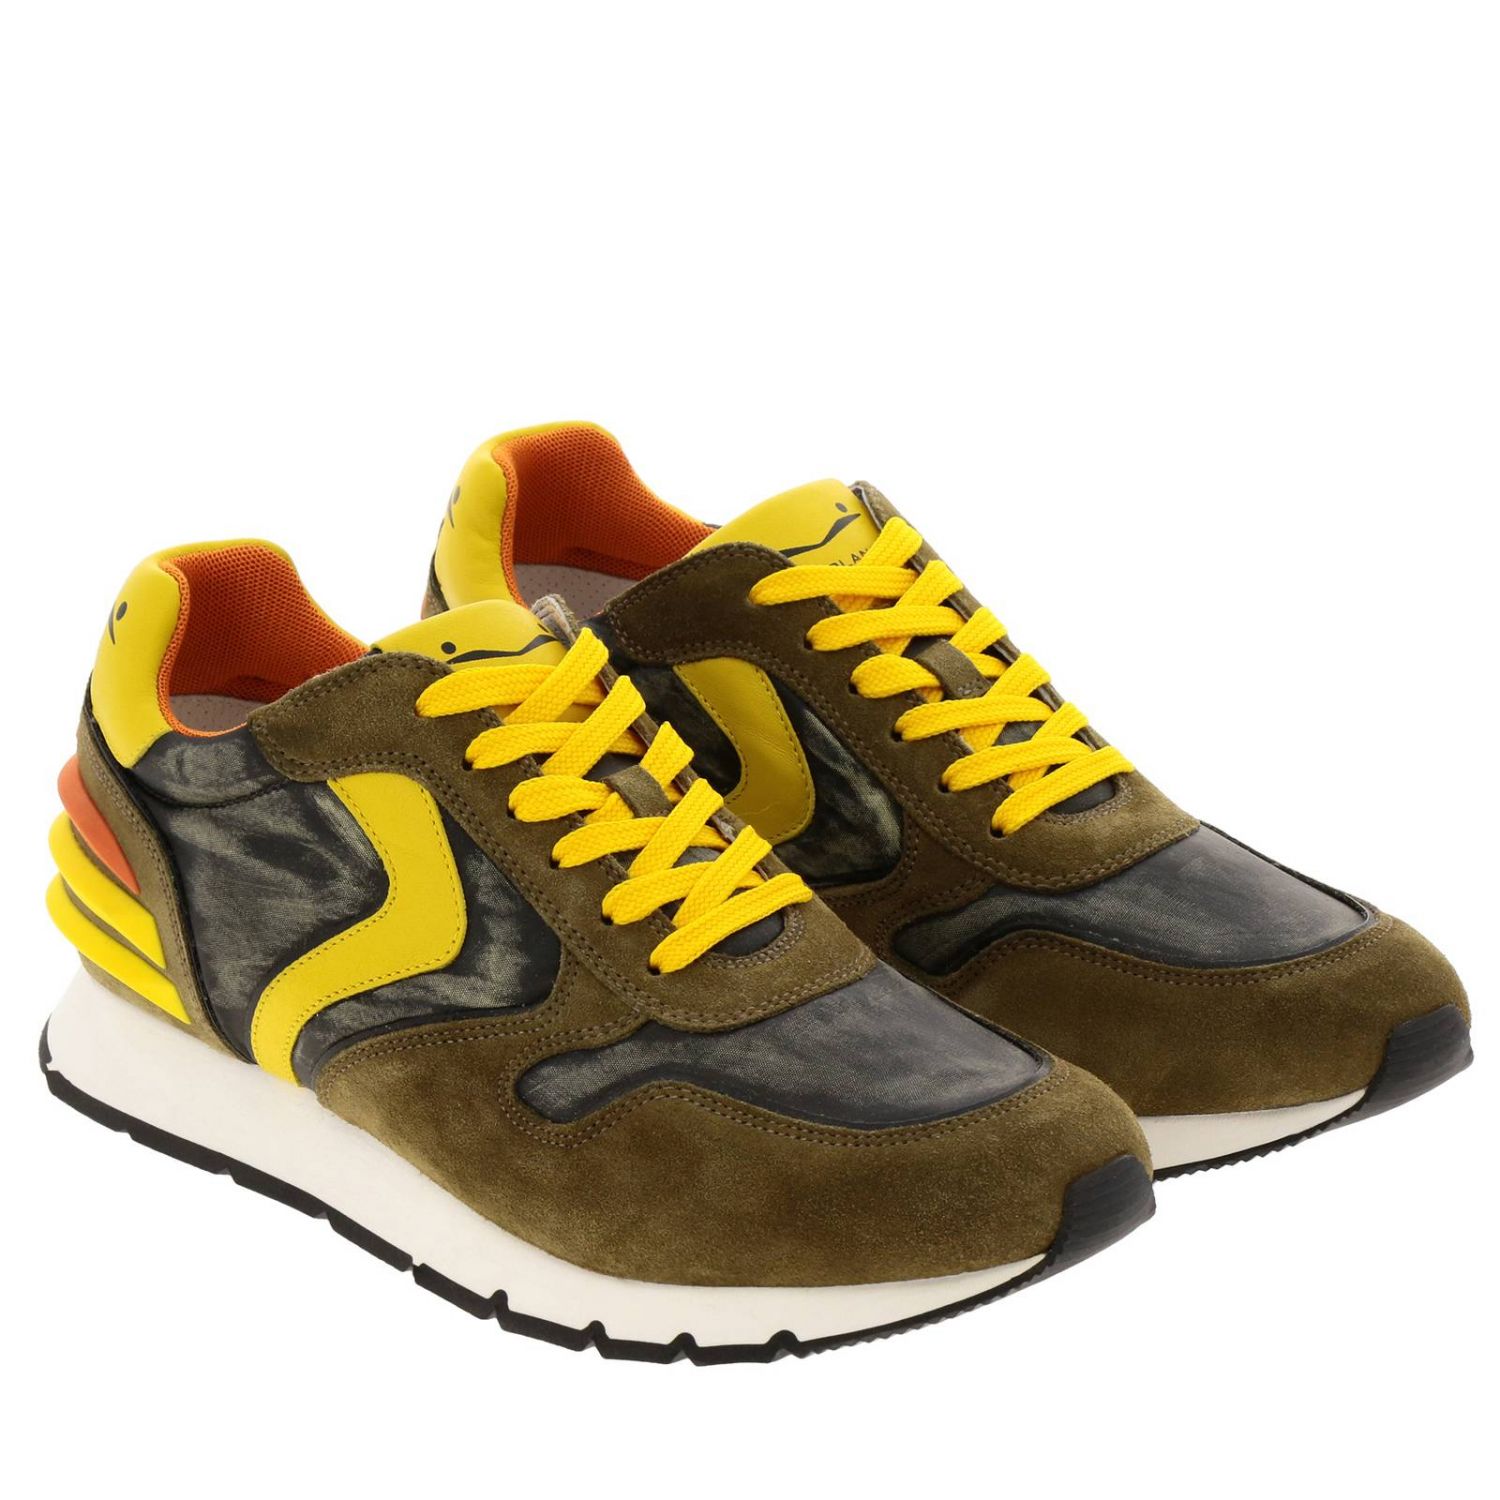 Voile Blanche Outlet: Sneakers men - Multicolor | Sneakers Voile ...